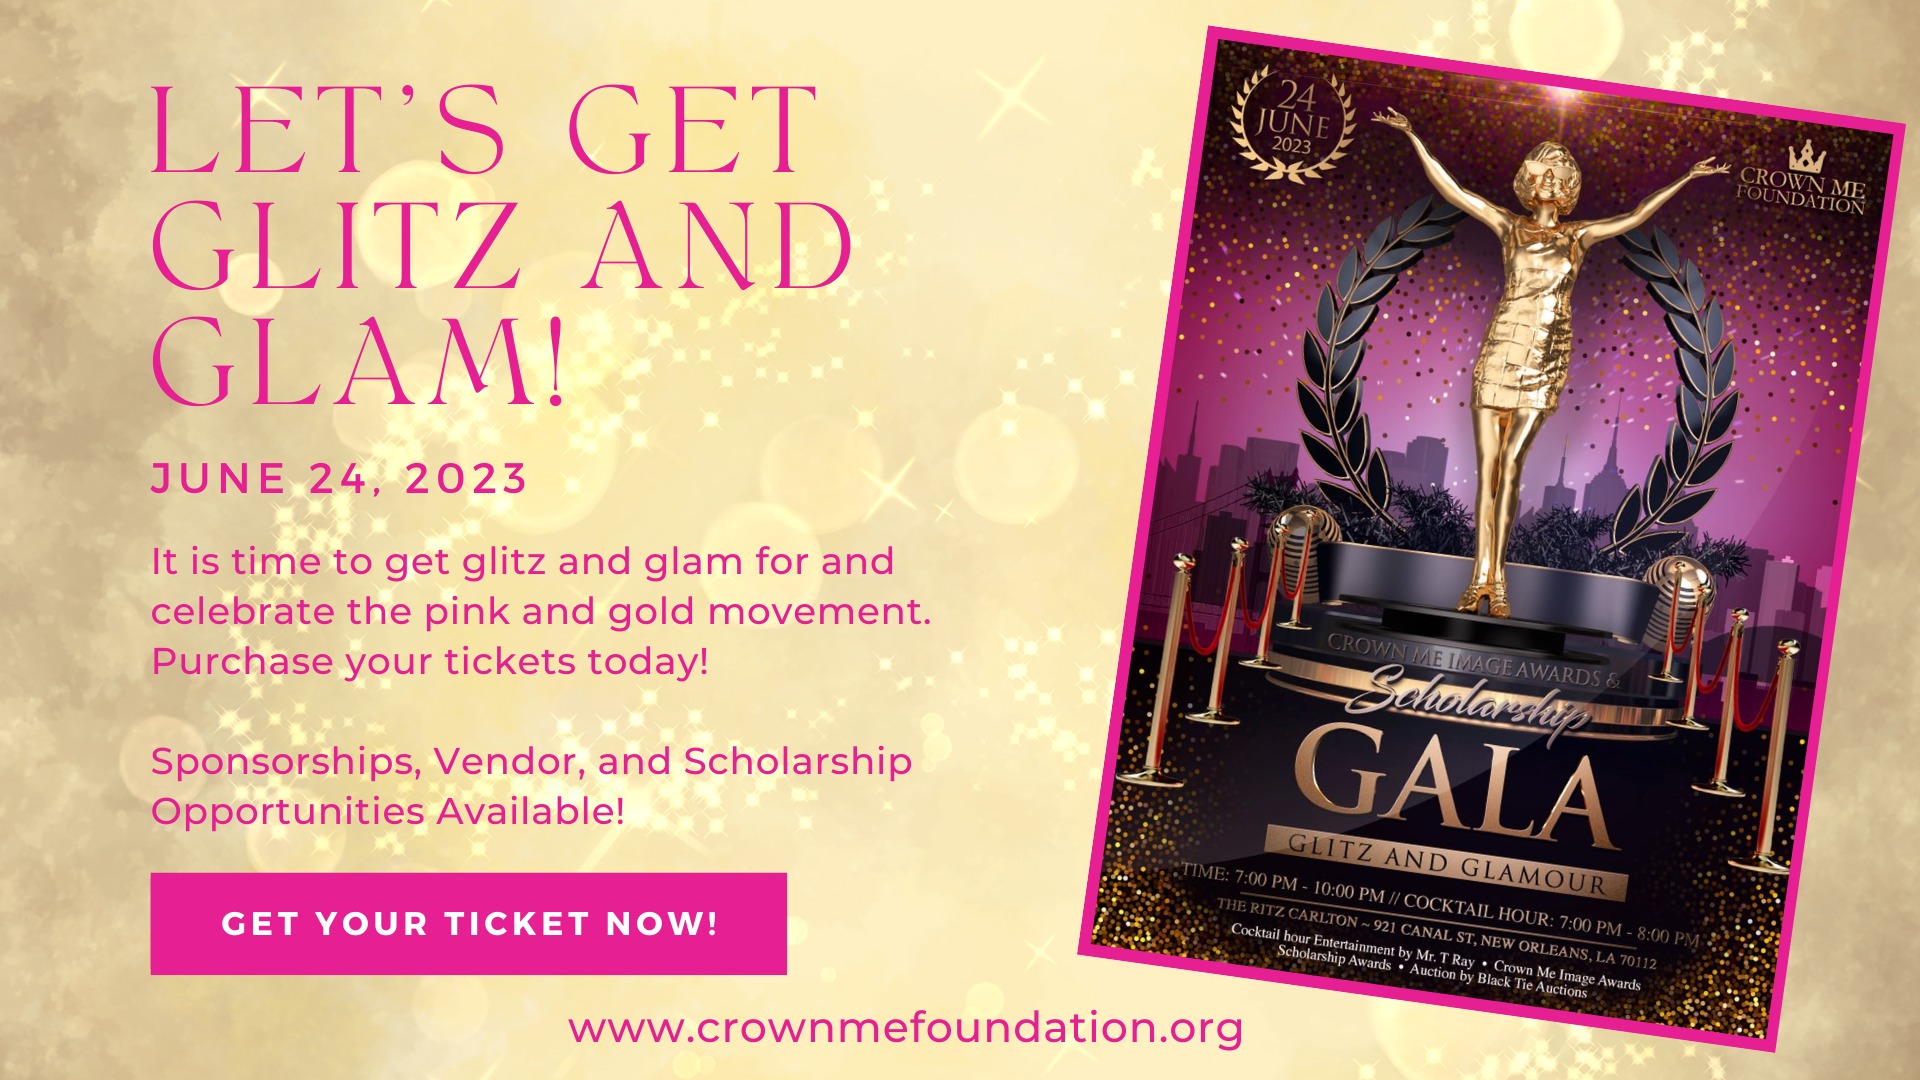 Crown Me Image Awards & Scholarship Gala | New Orleans Local News